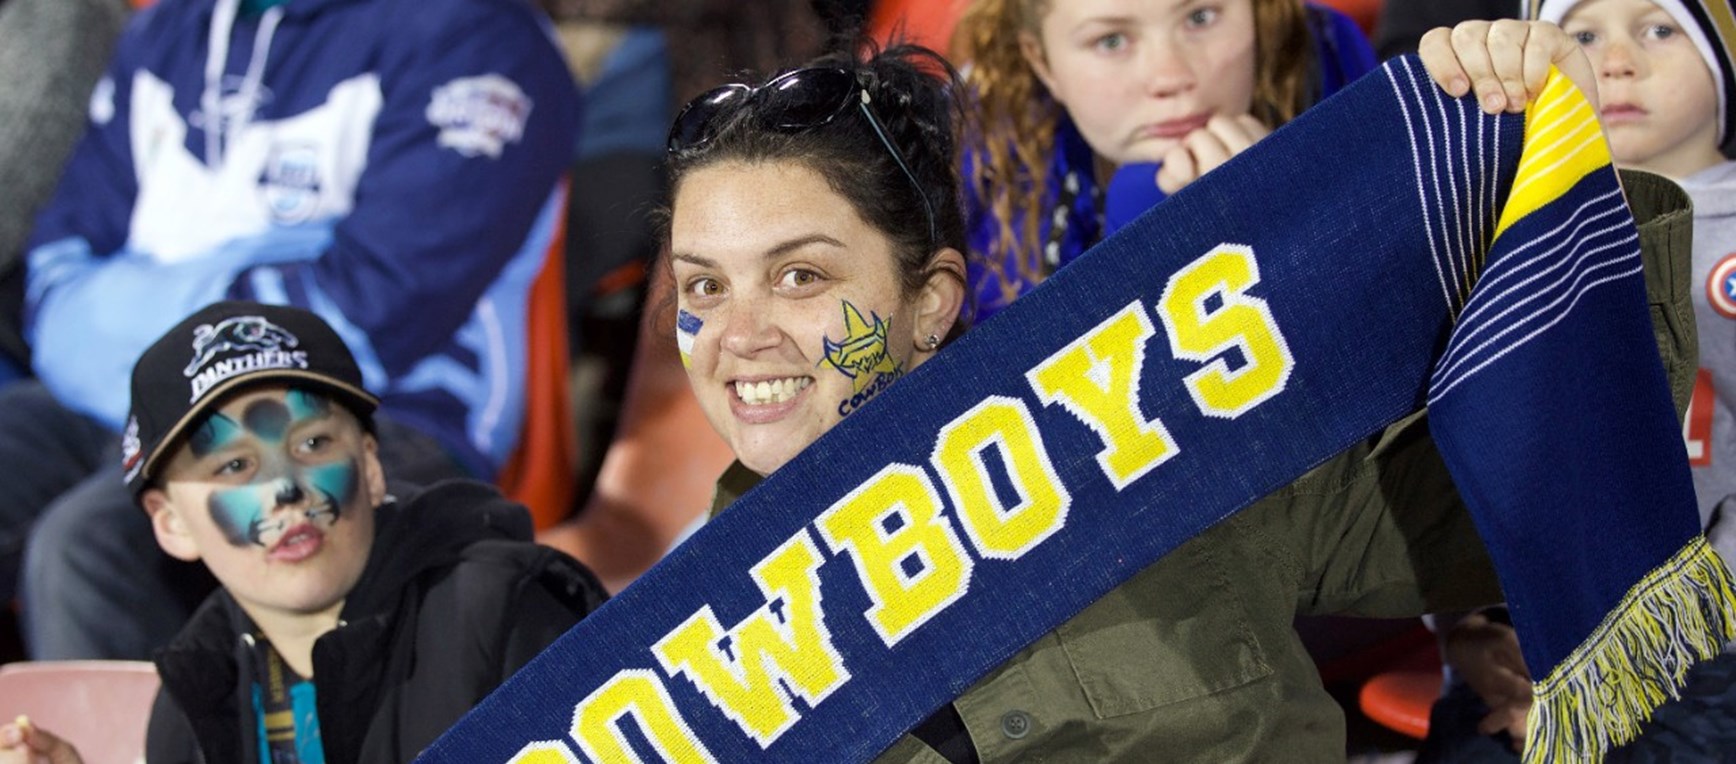 [Gallery] Thanks Cowboys fans!